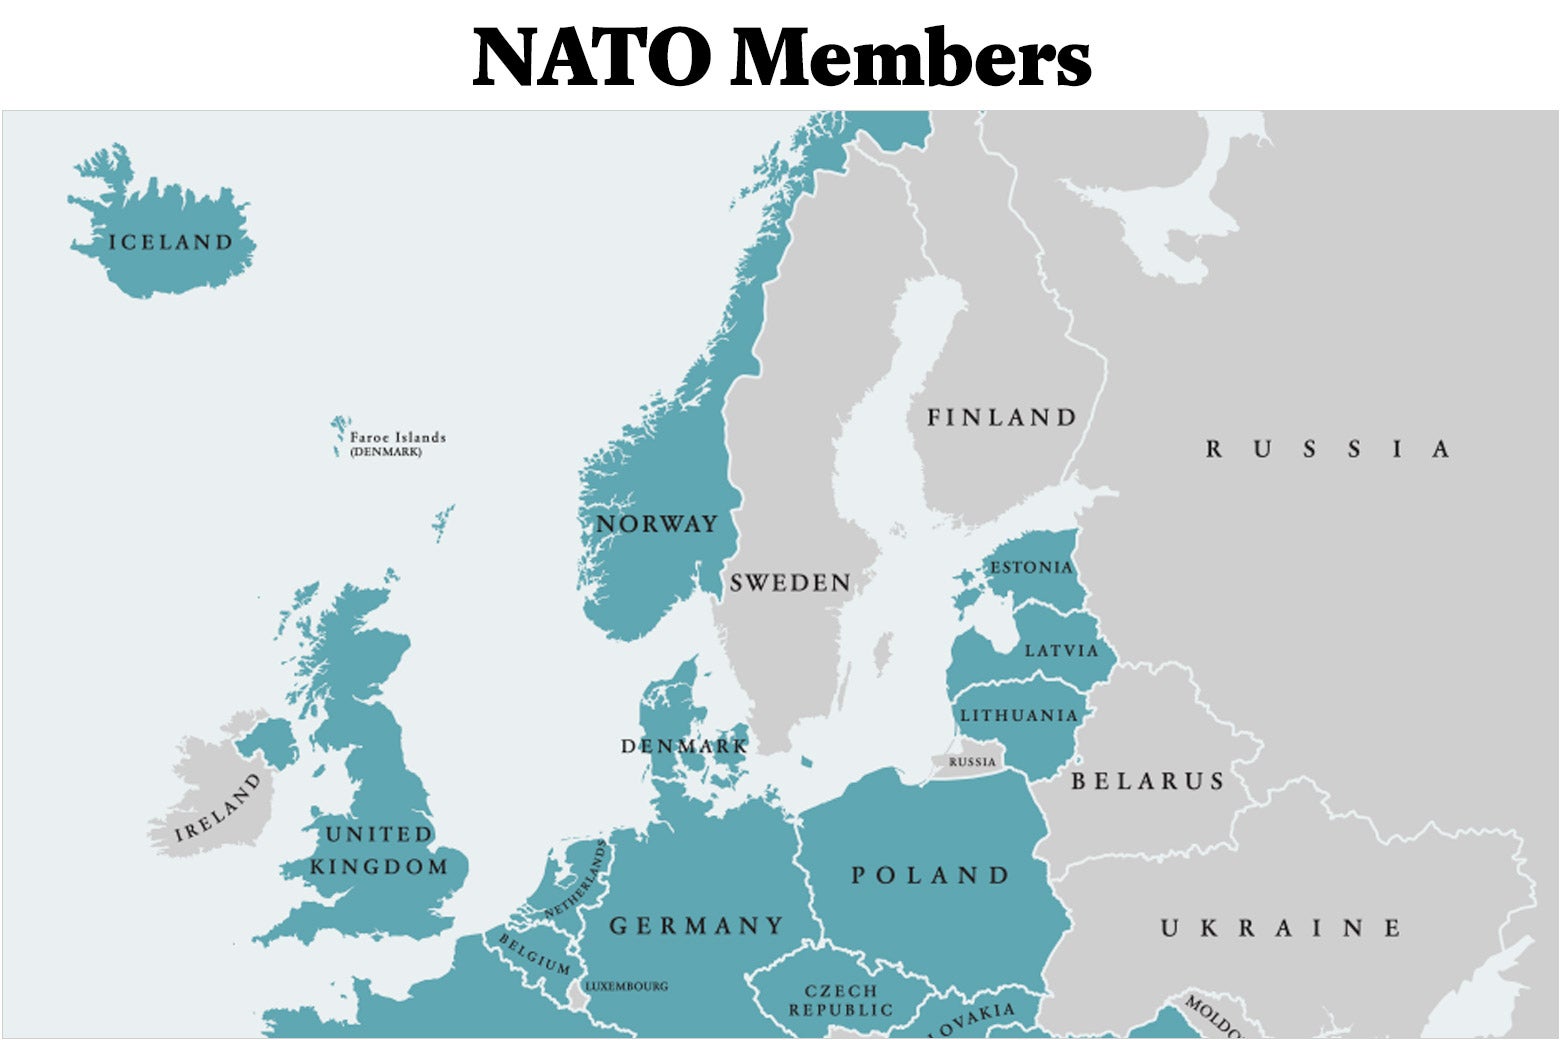 A map of Northern Europe with NATO member nations highlighted